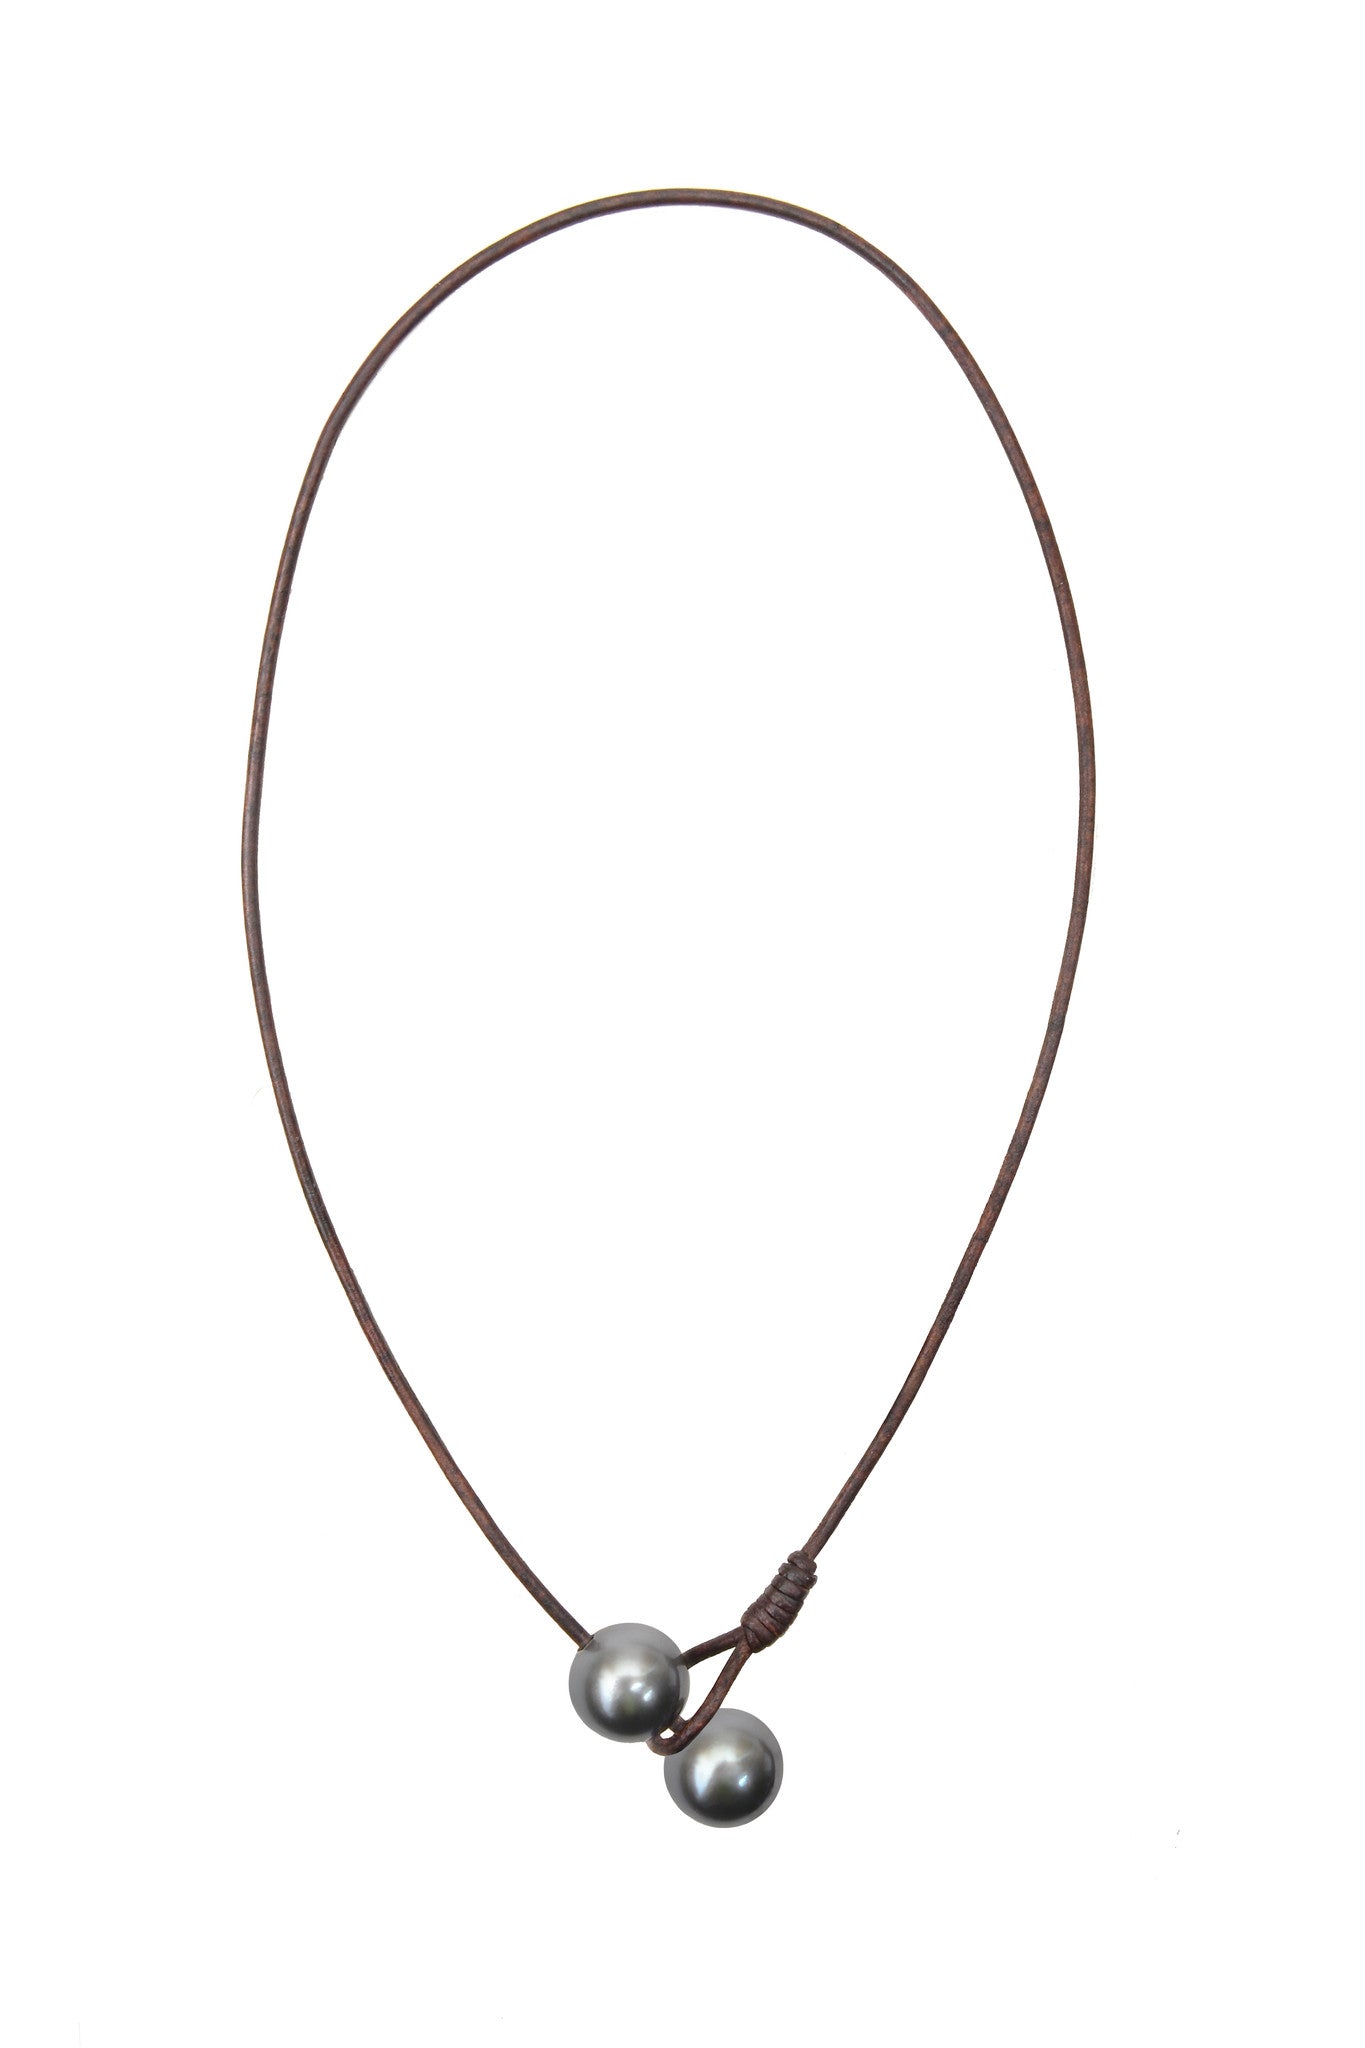 Seaplicity Necklace, Options - Hottest Designer Pearl and Leather Jewelry | VINCENT PEACH
 - 3